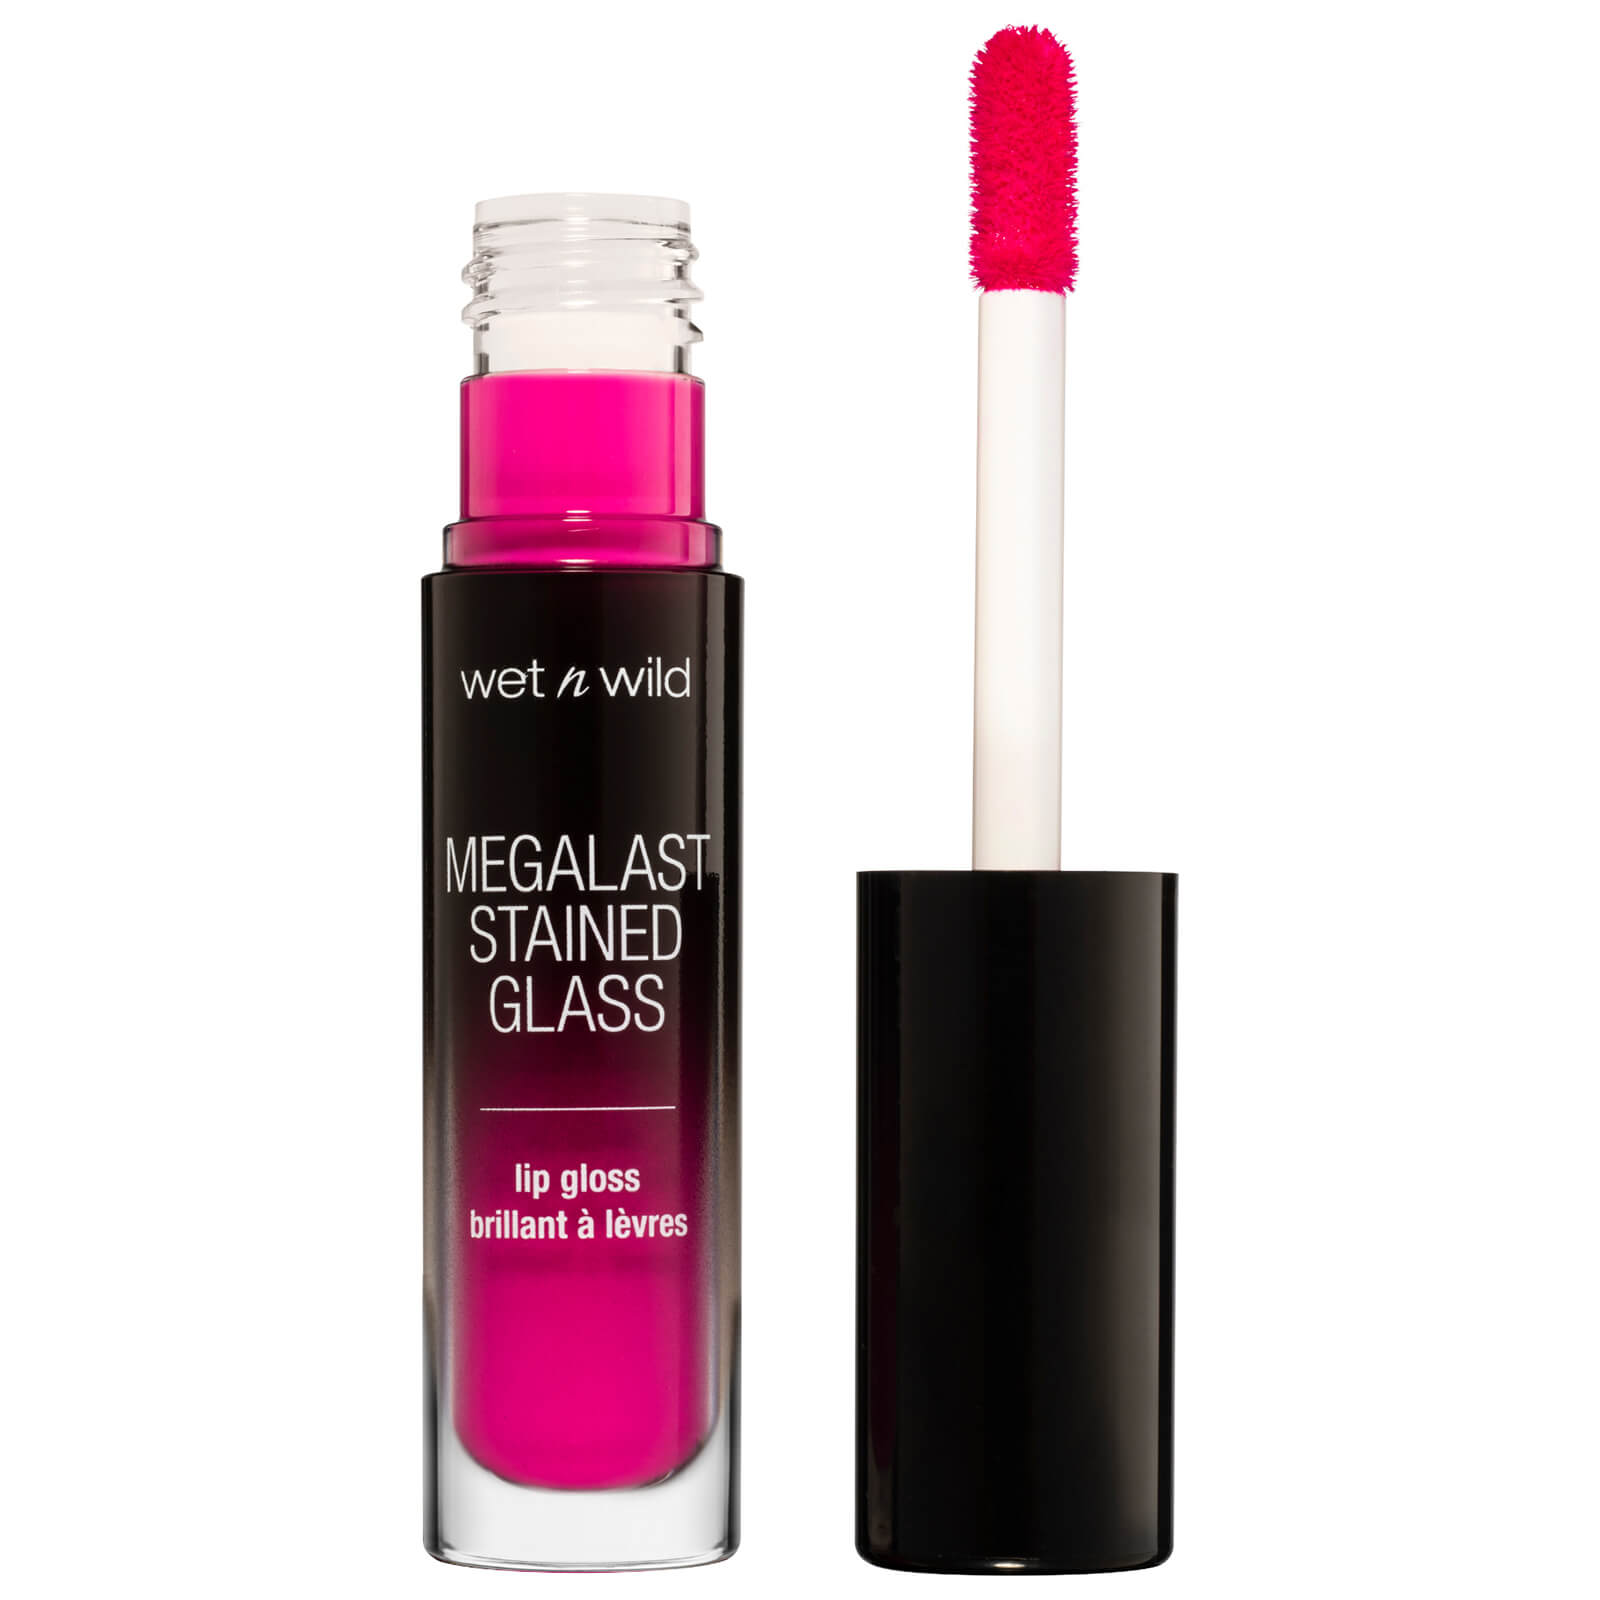 wet n wild Megalast Stained Glass Lip Gloss 20g (Various Shades) - Kiss my Glass